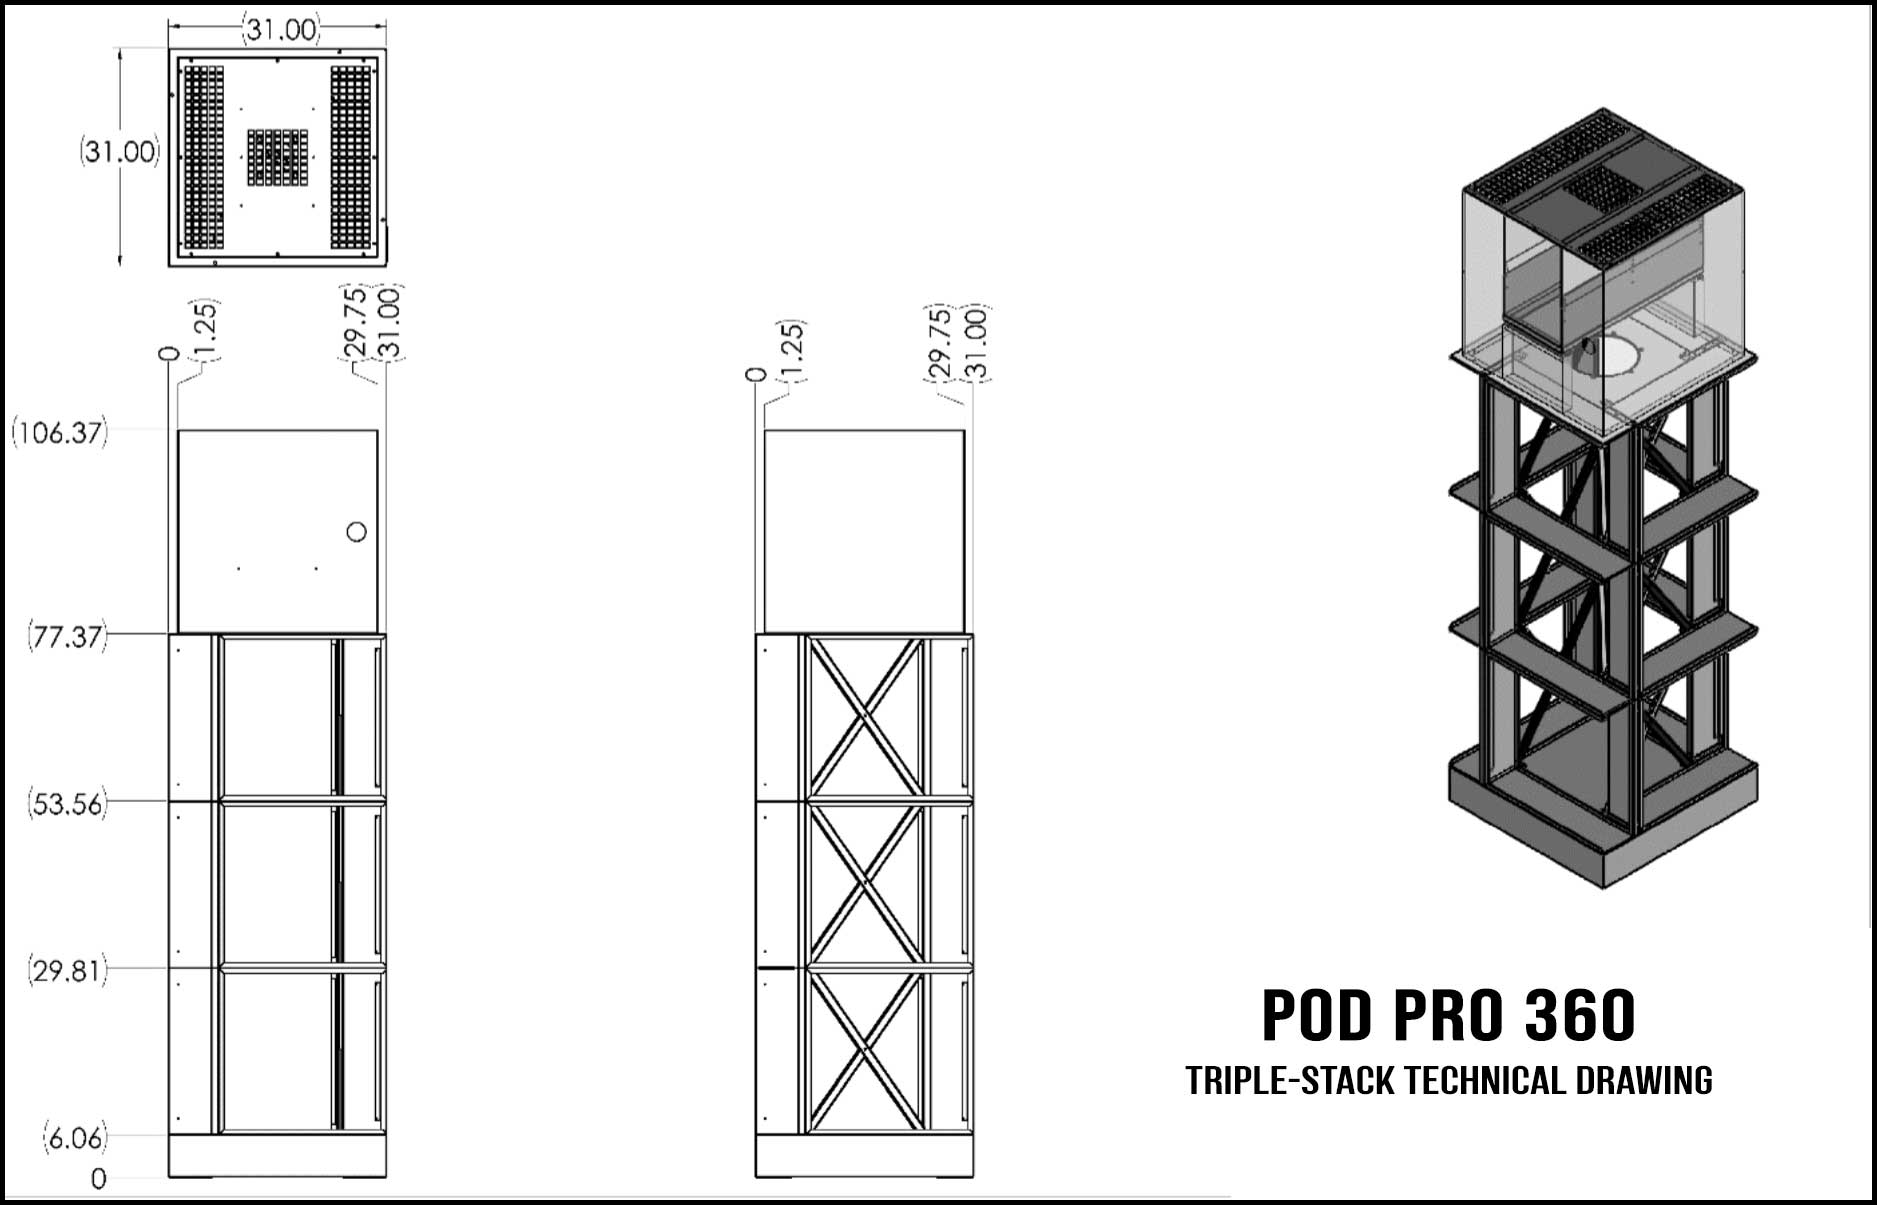 Pod Pro 360 Double-Stack Technical Drawing